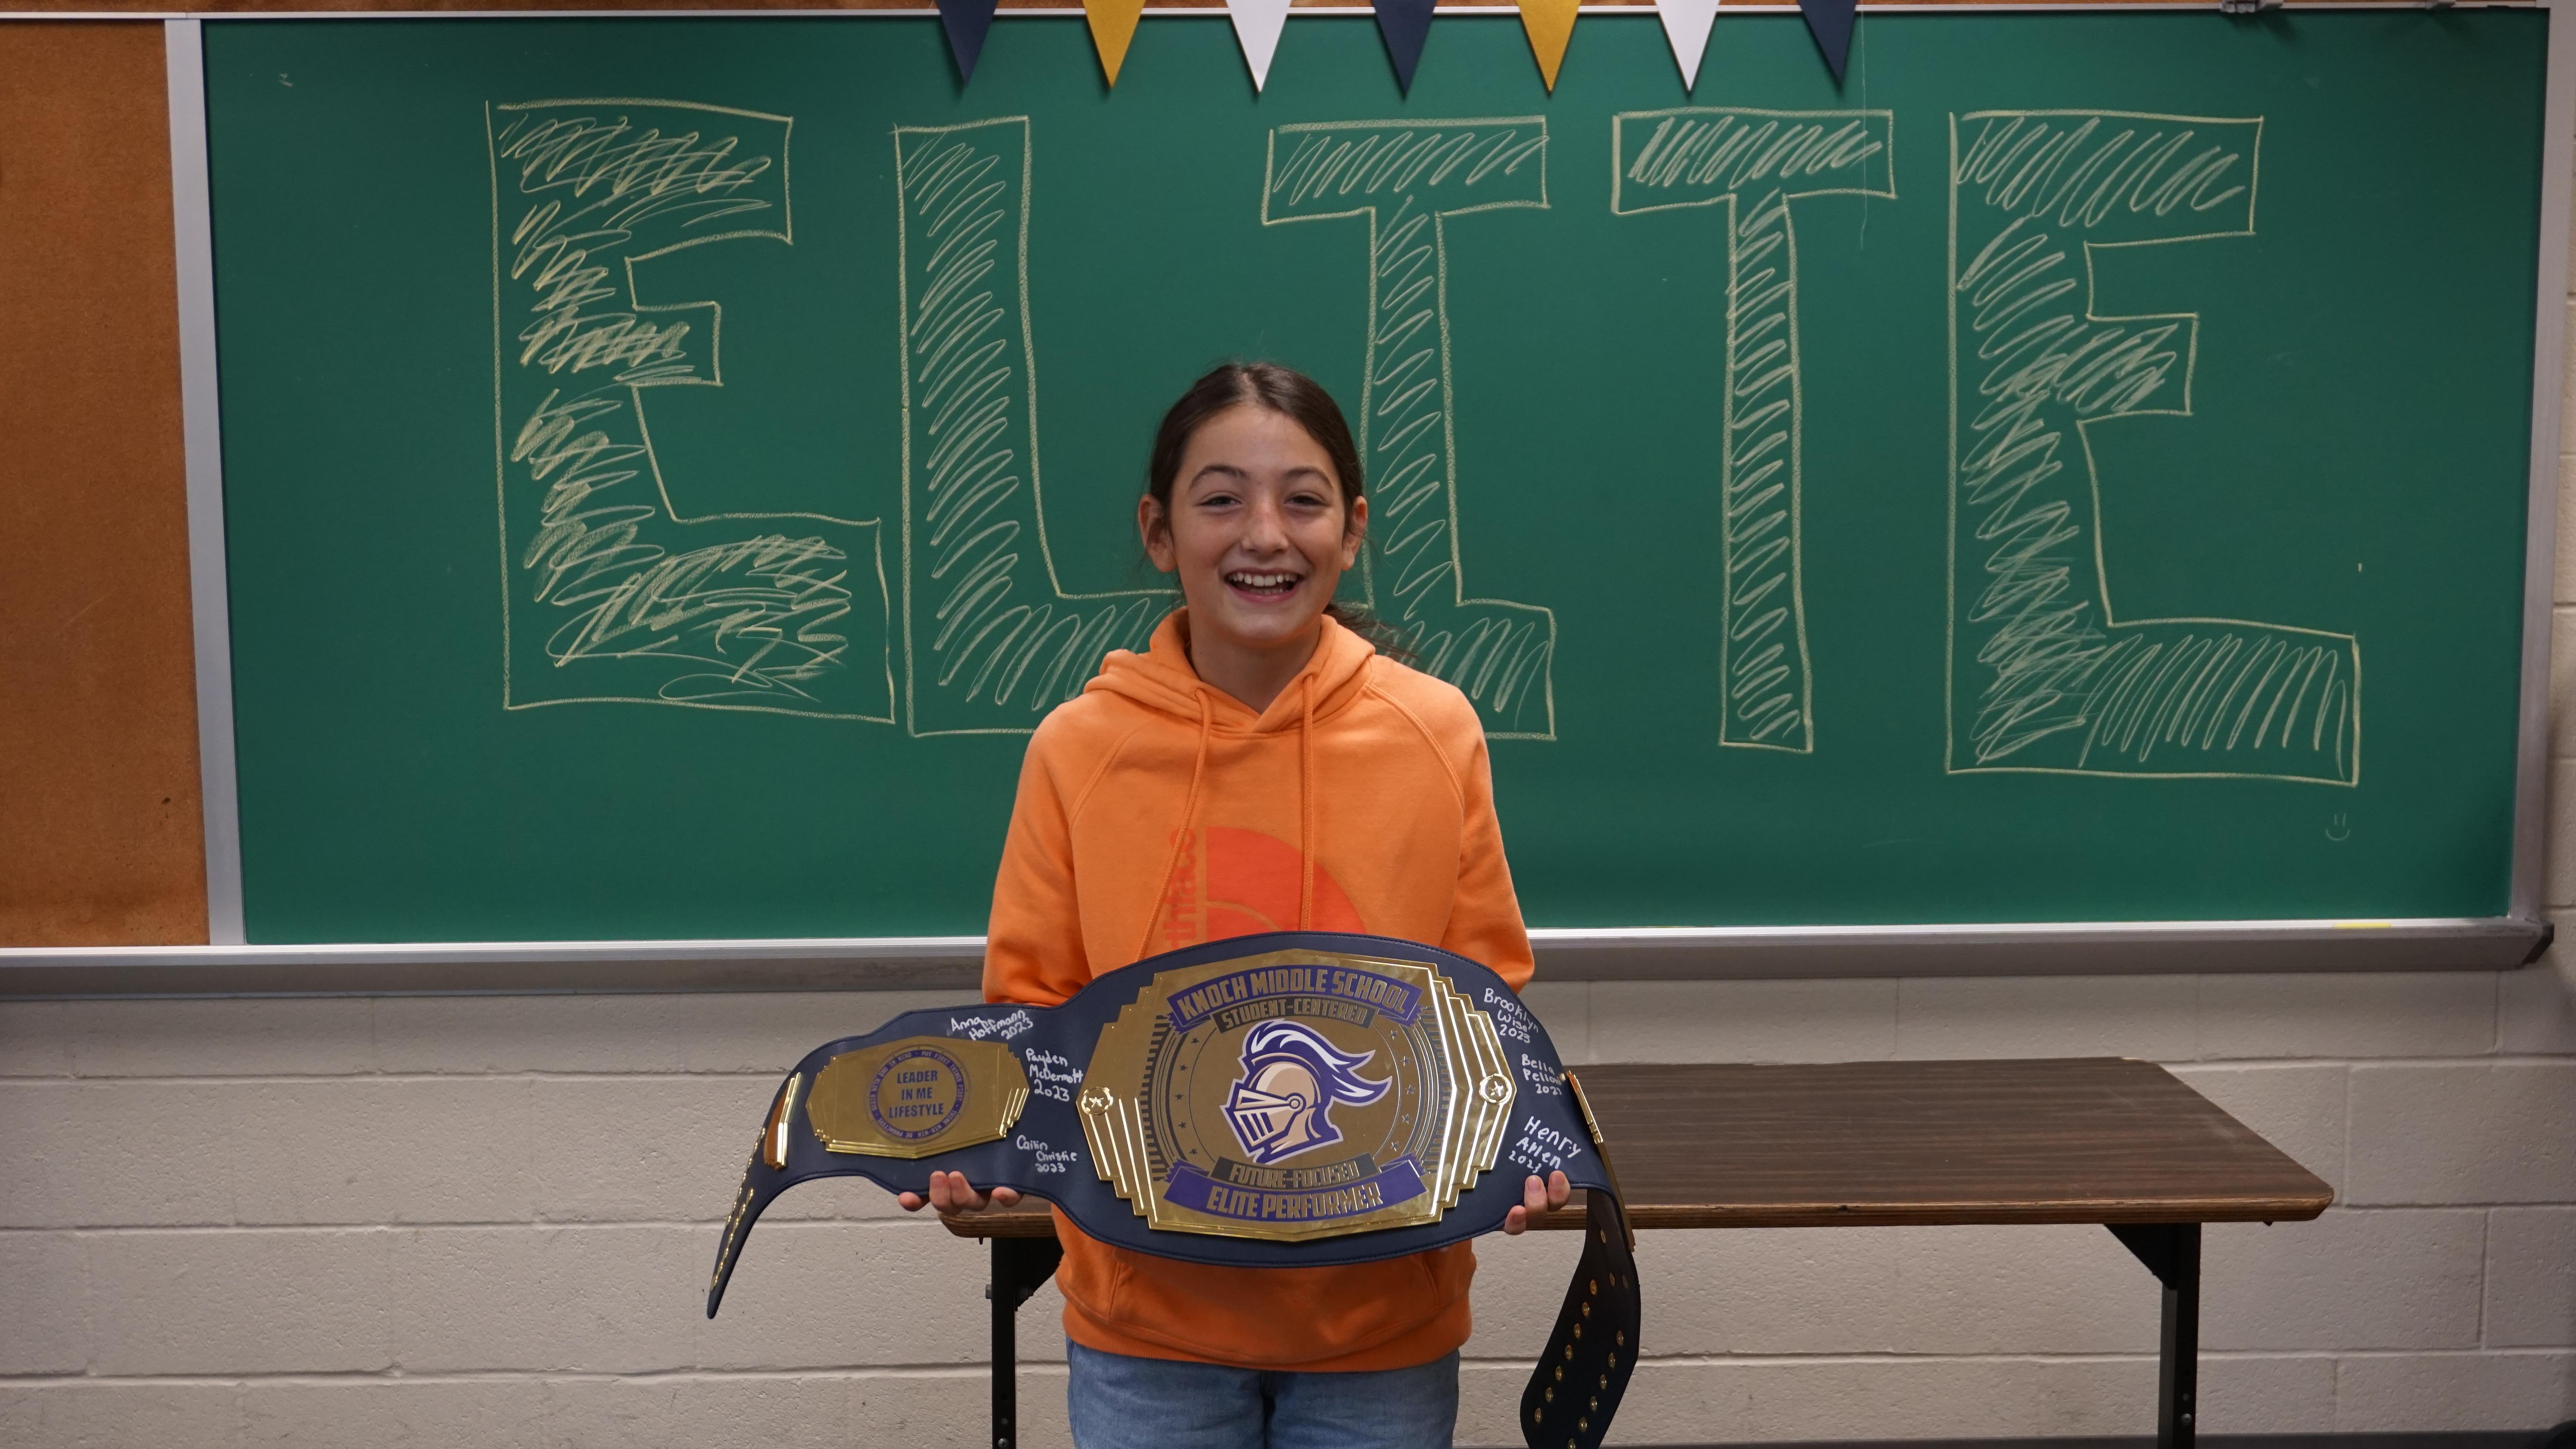 pic of a girl with a huge prize belt